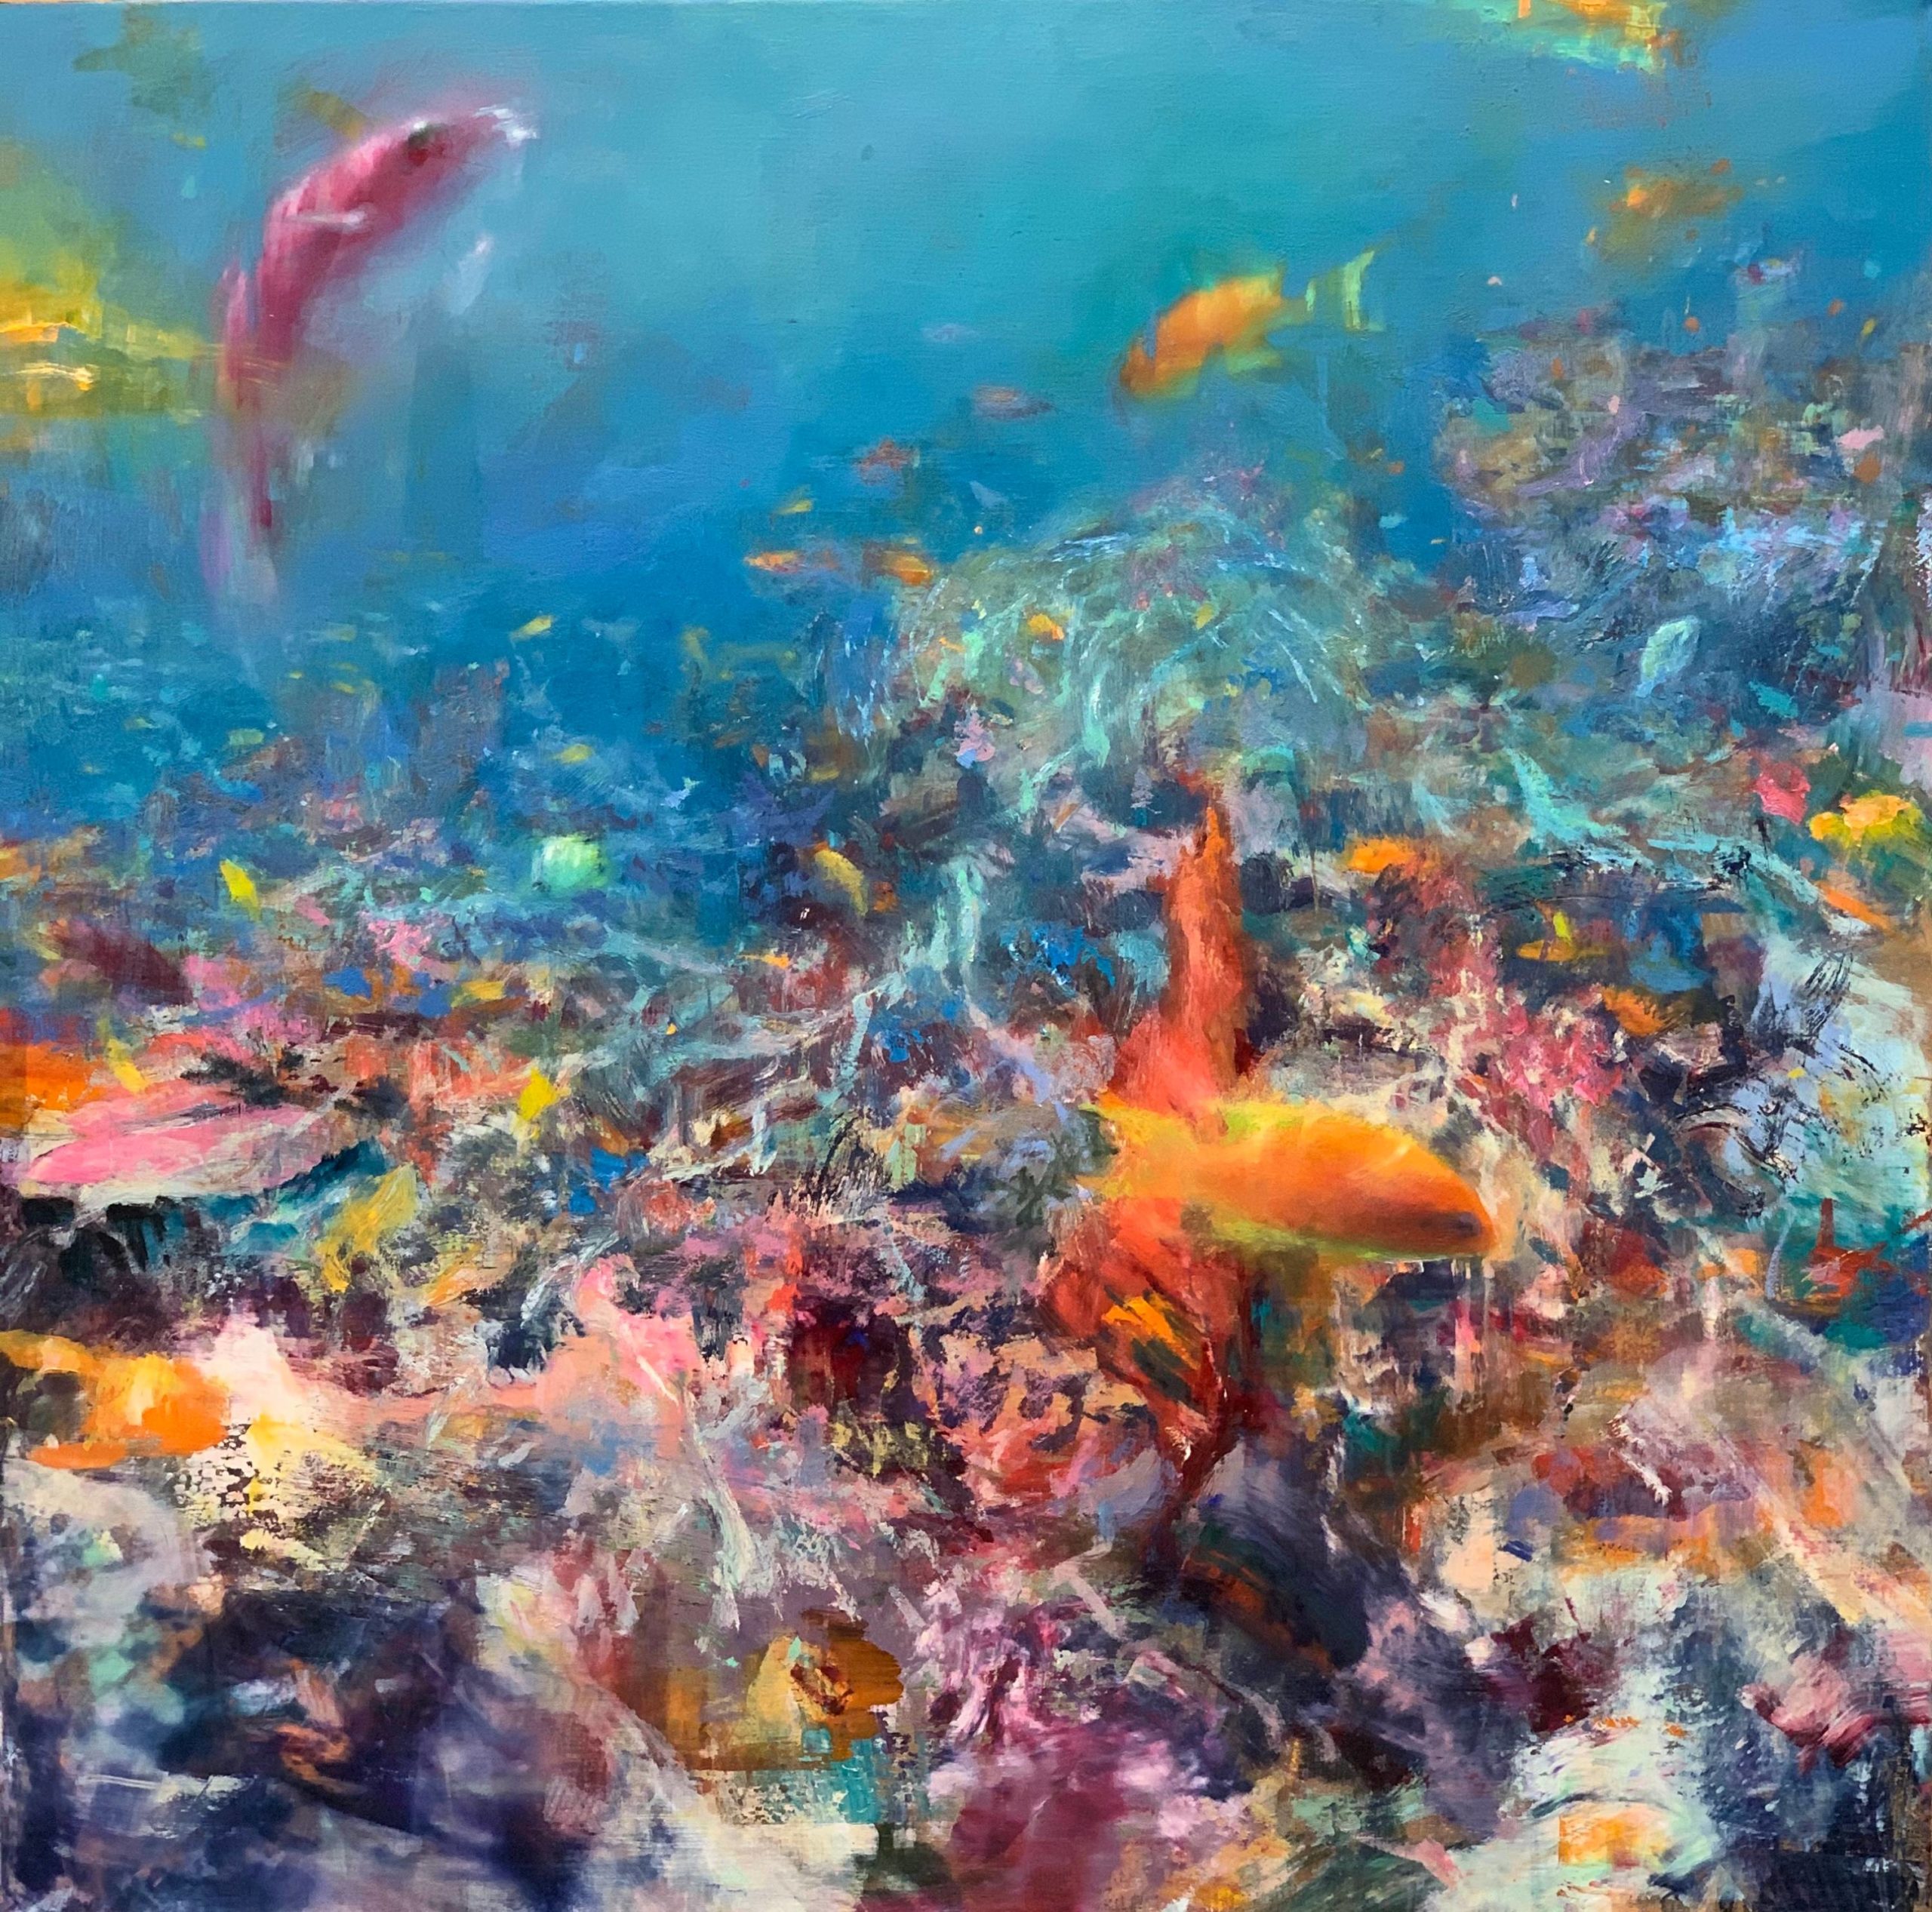 David and Nansi Gallup, "Rainbow Reef Snorkel, Fiji," 2019, oil, 24 x 24 in., Private collection, Studio from plein air studies